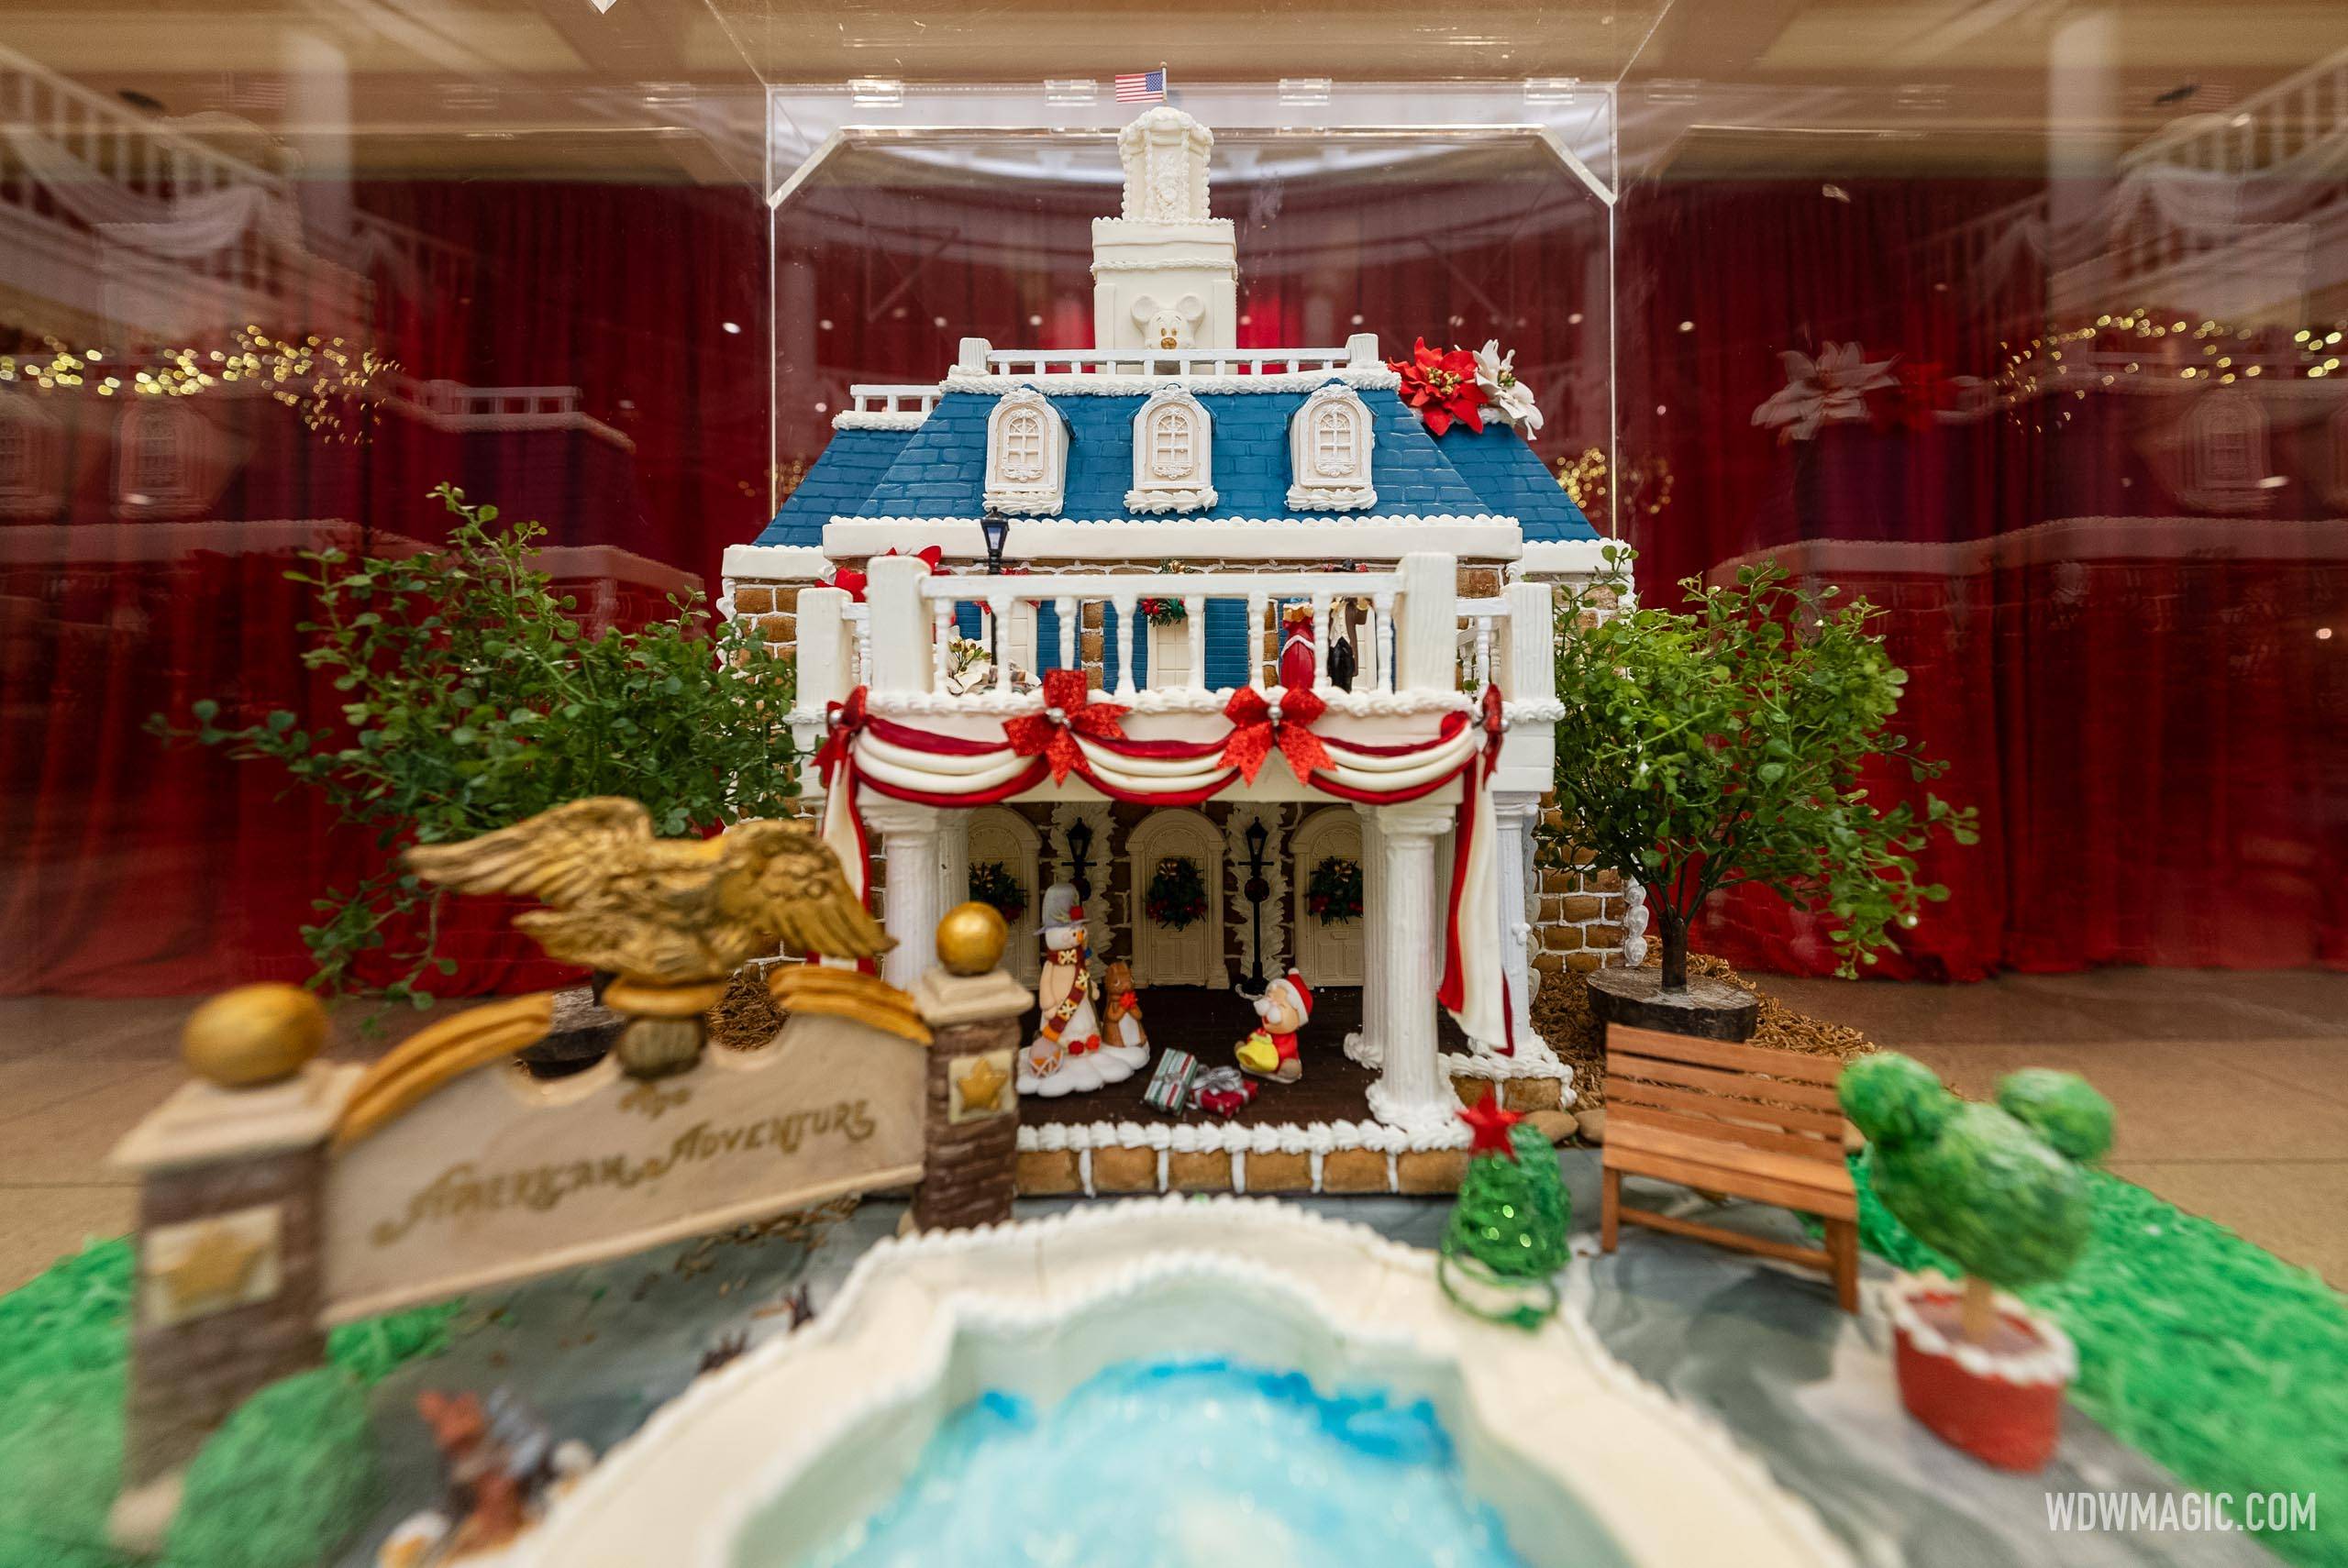 The American Adventure Pavilion gingerbread display